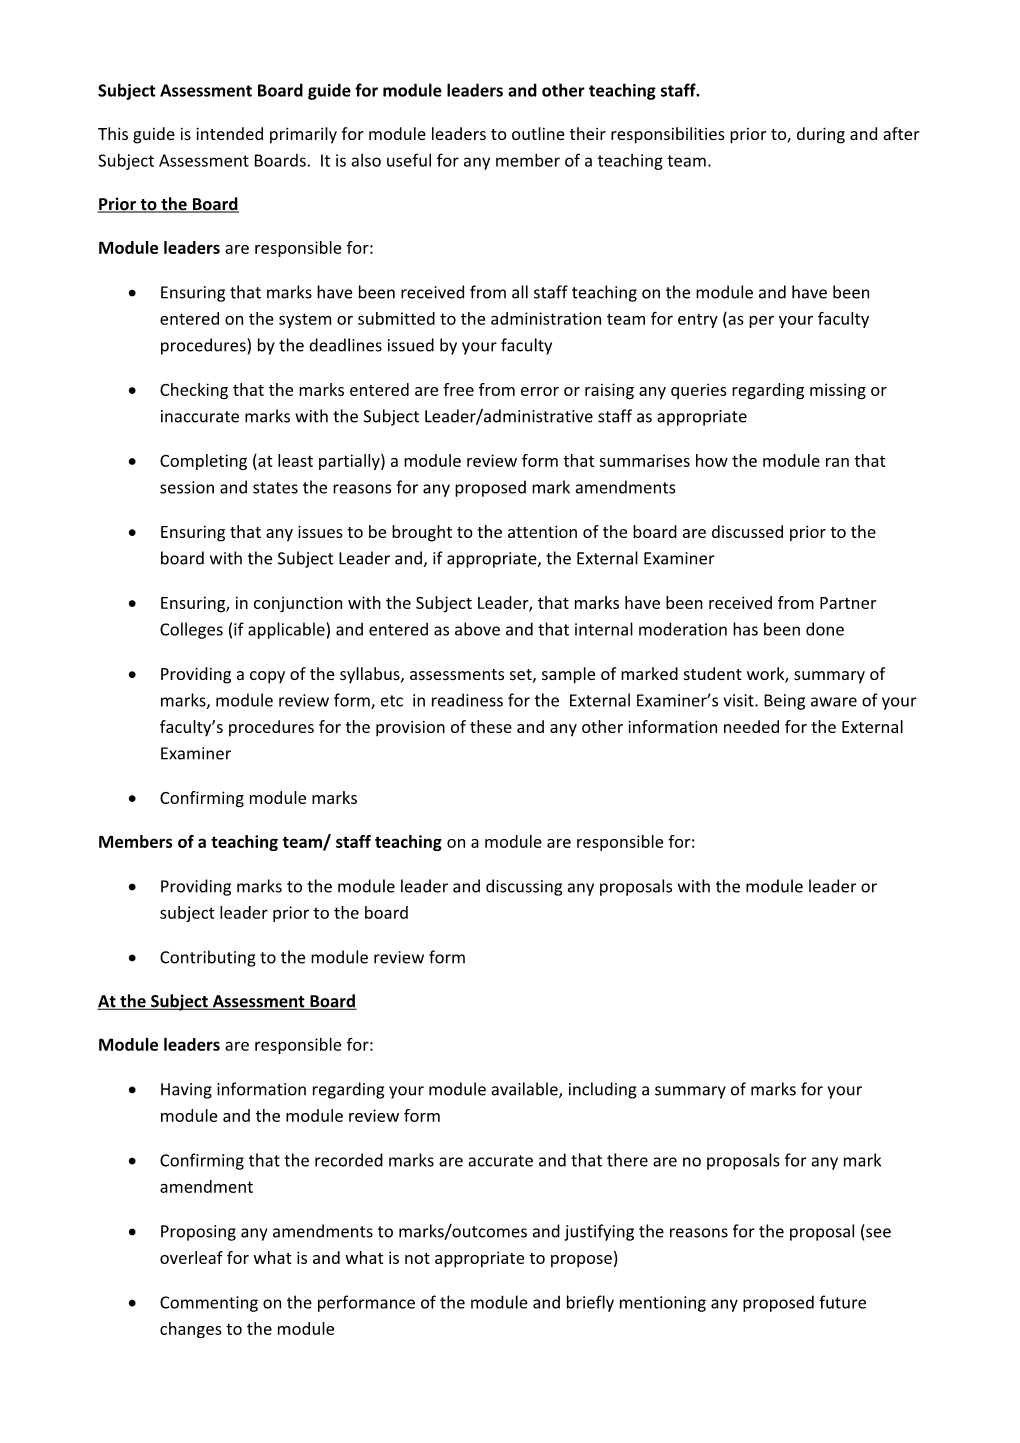 Subject Assessment Board Guide for Module Leaders and Other Teaching Staff